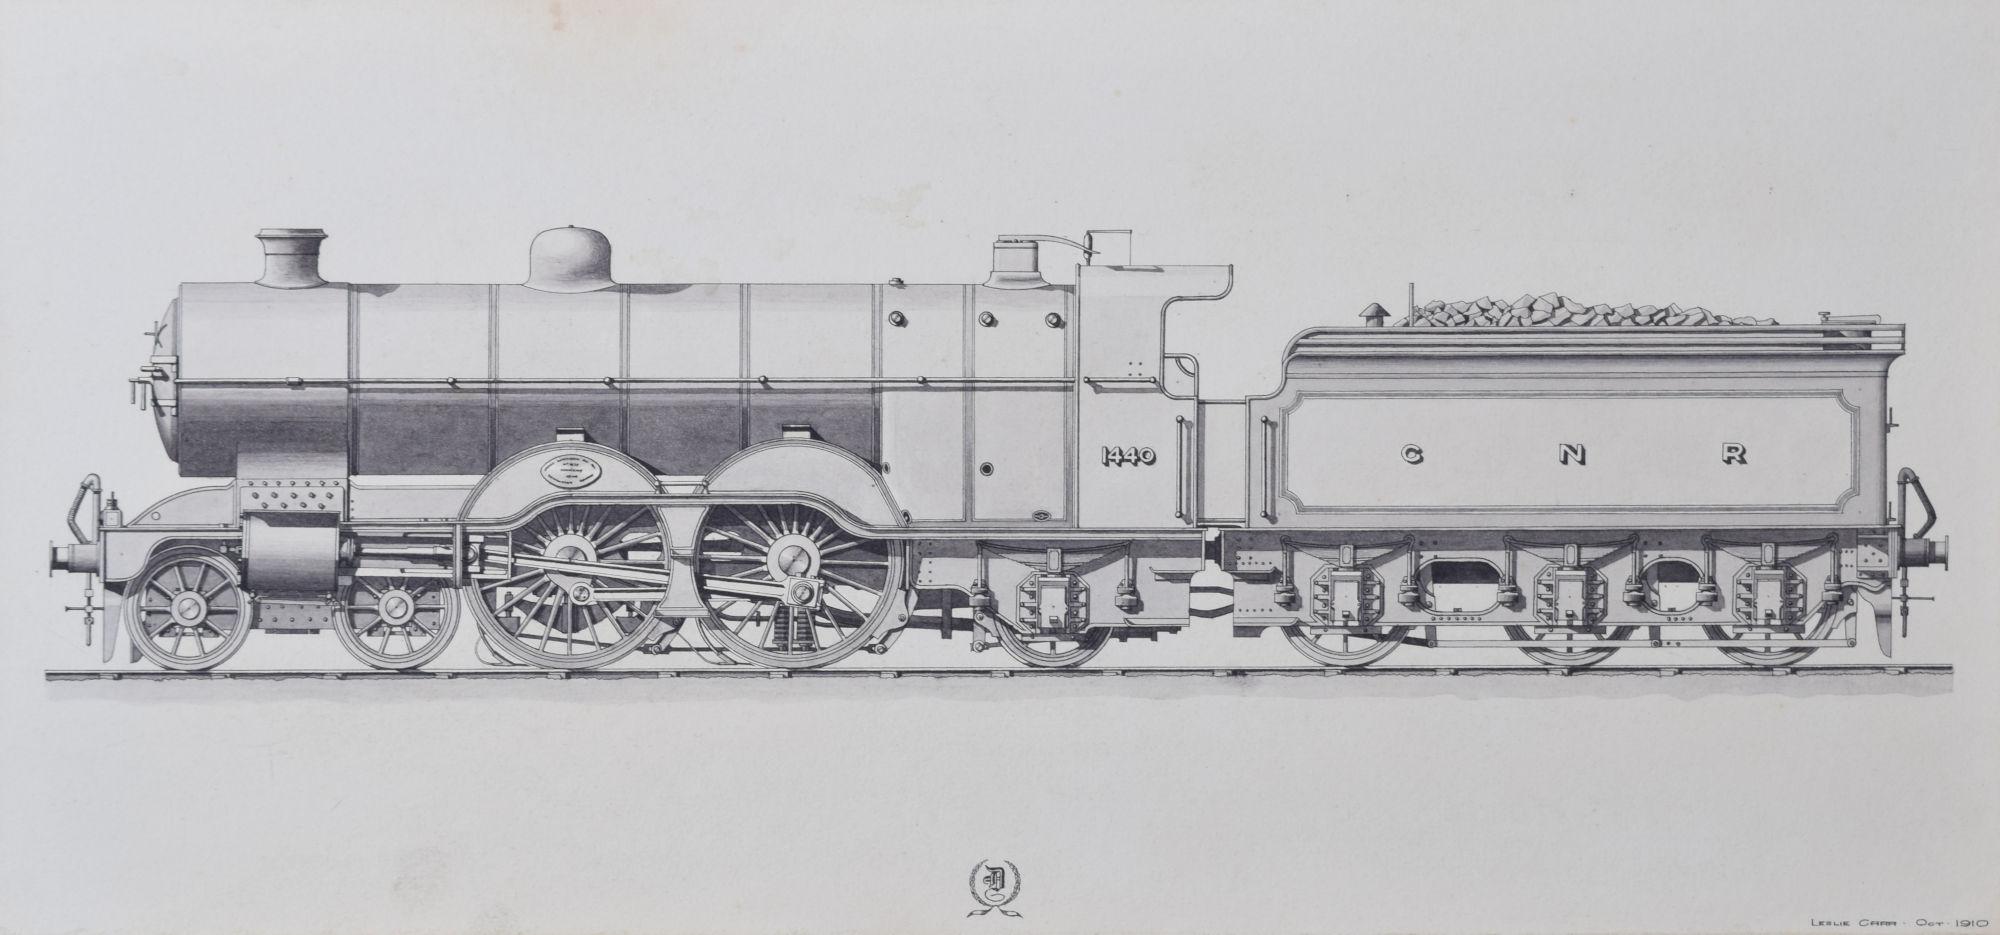 To see more, scroll down to "More from this Seller" and below it click on "See all from this Seller." 

Leslie Carr (1891 - 1969)
1440 Great Northern Railway (1910)
Pen and ink
19 x 41 cm

Signed and dated lower right.

The Great Northern Railway